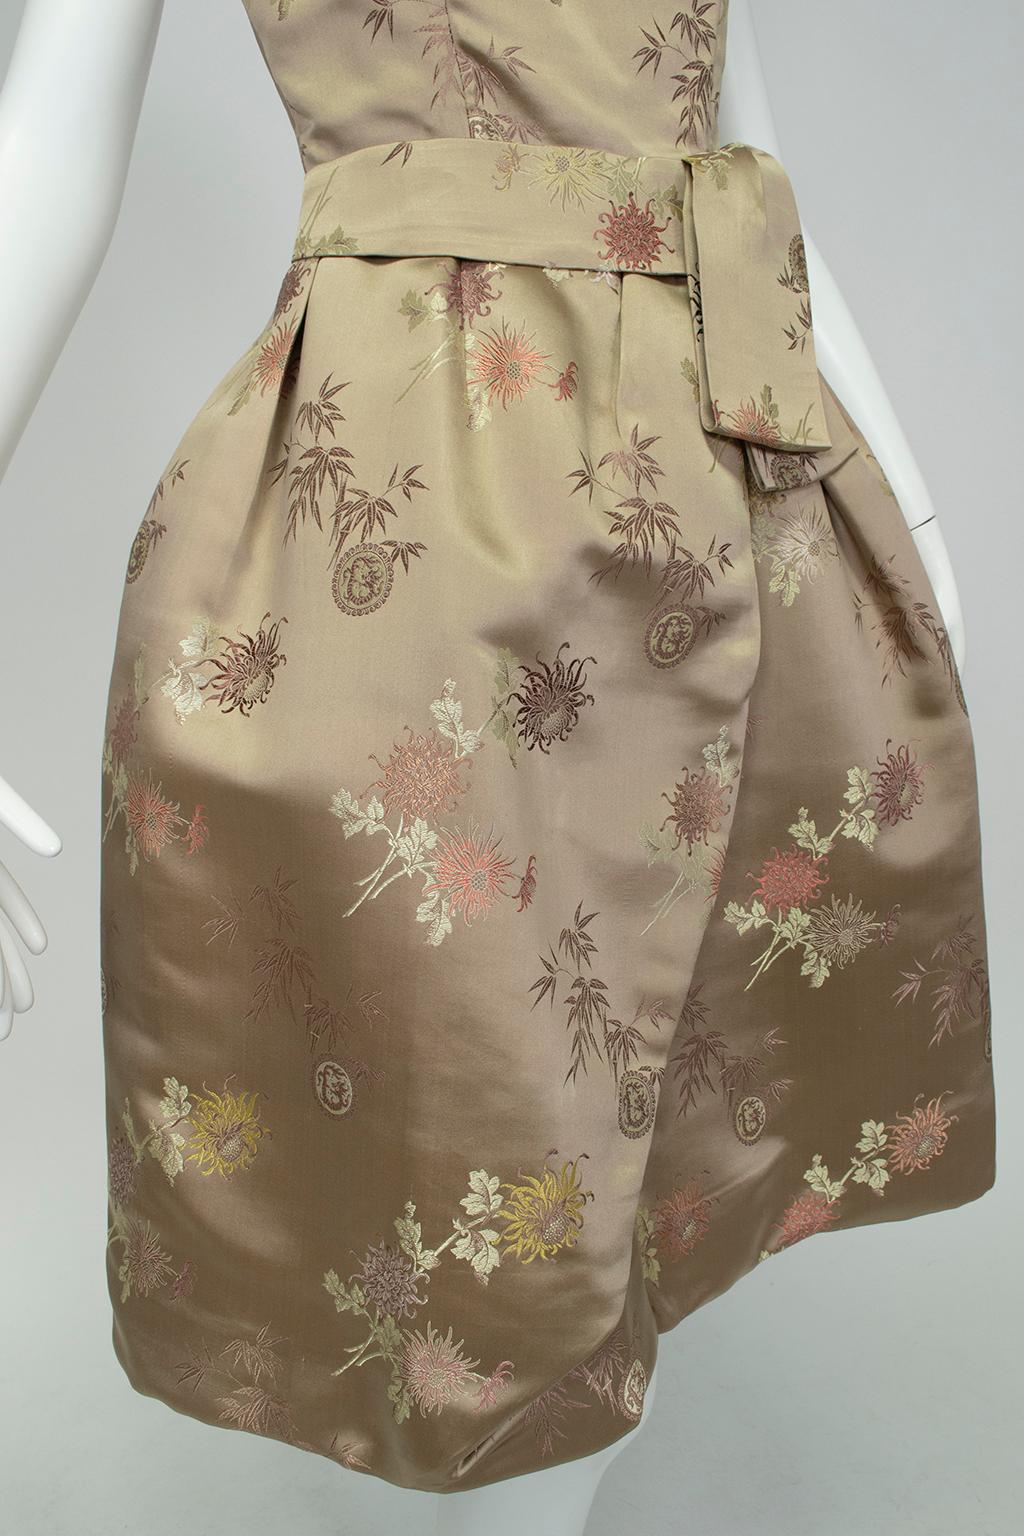 Jacques Cassia Haute Couture Taupe Brocade Corolle Tulip Skirt Dress - S, 1960s For Sale 3